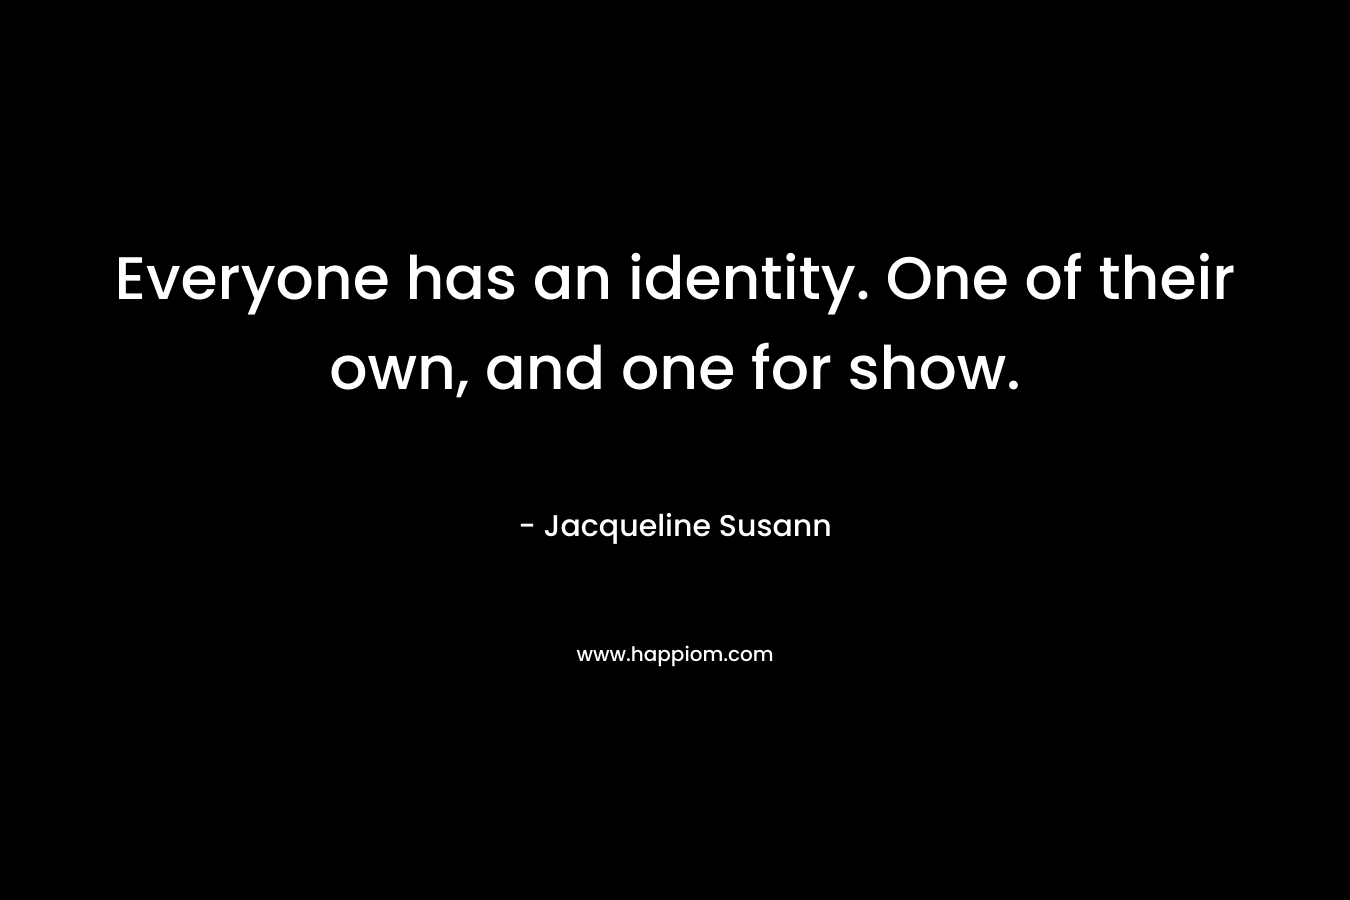 Everyone has an identity. One of their own, and one for show.